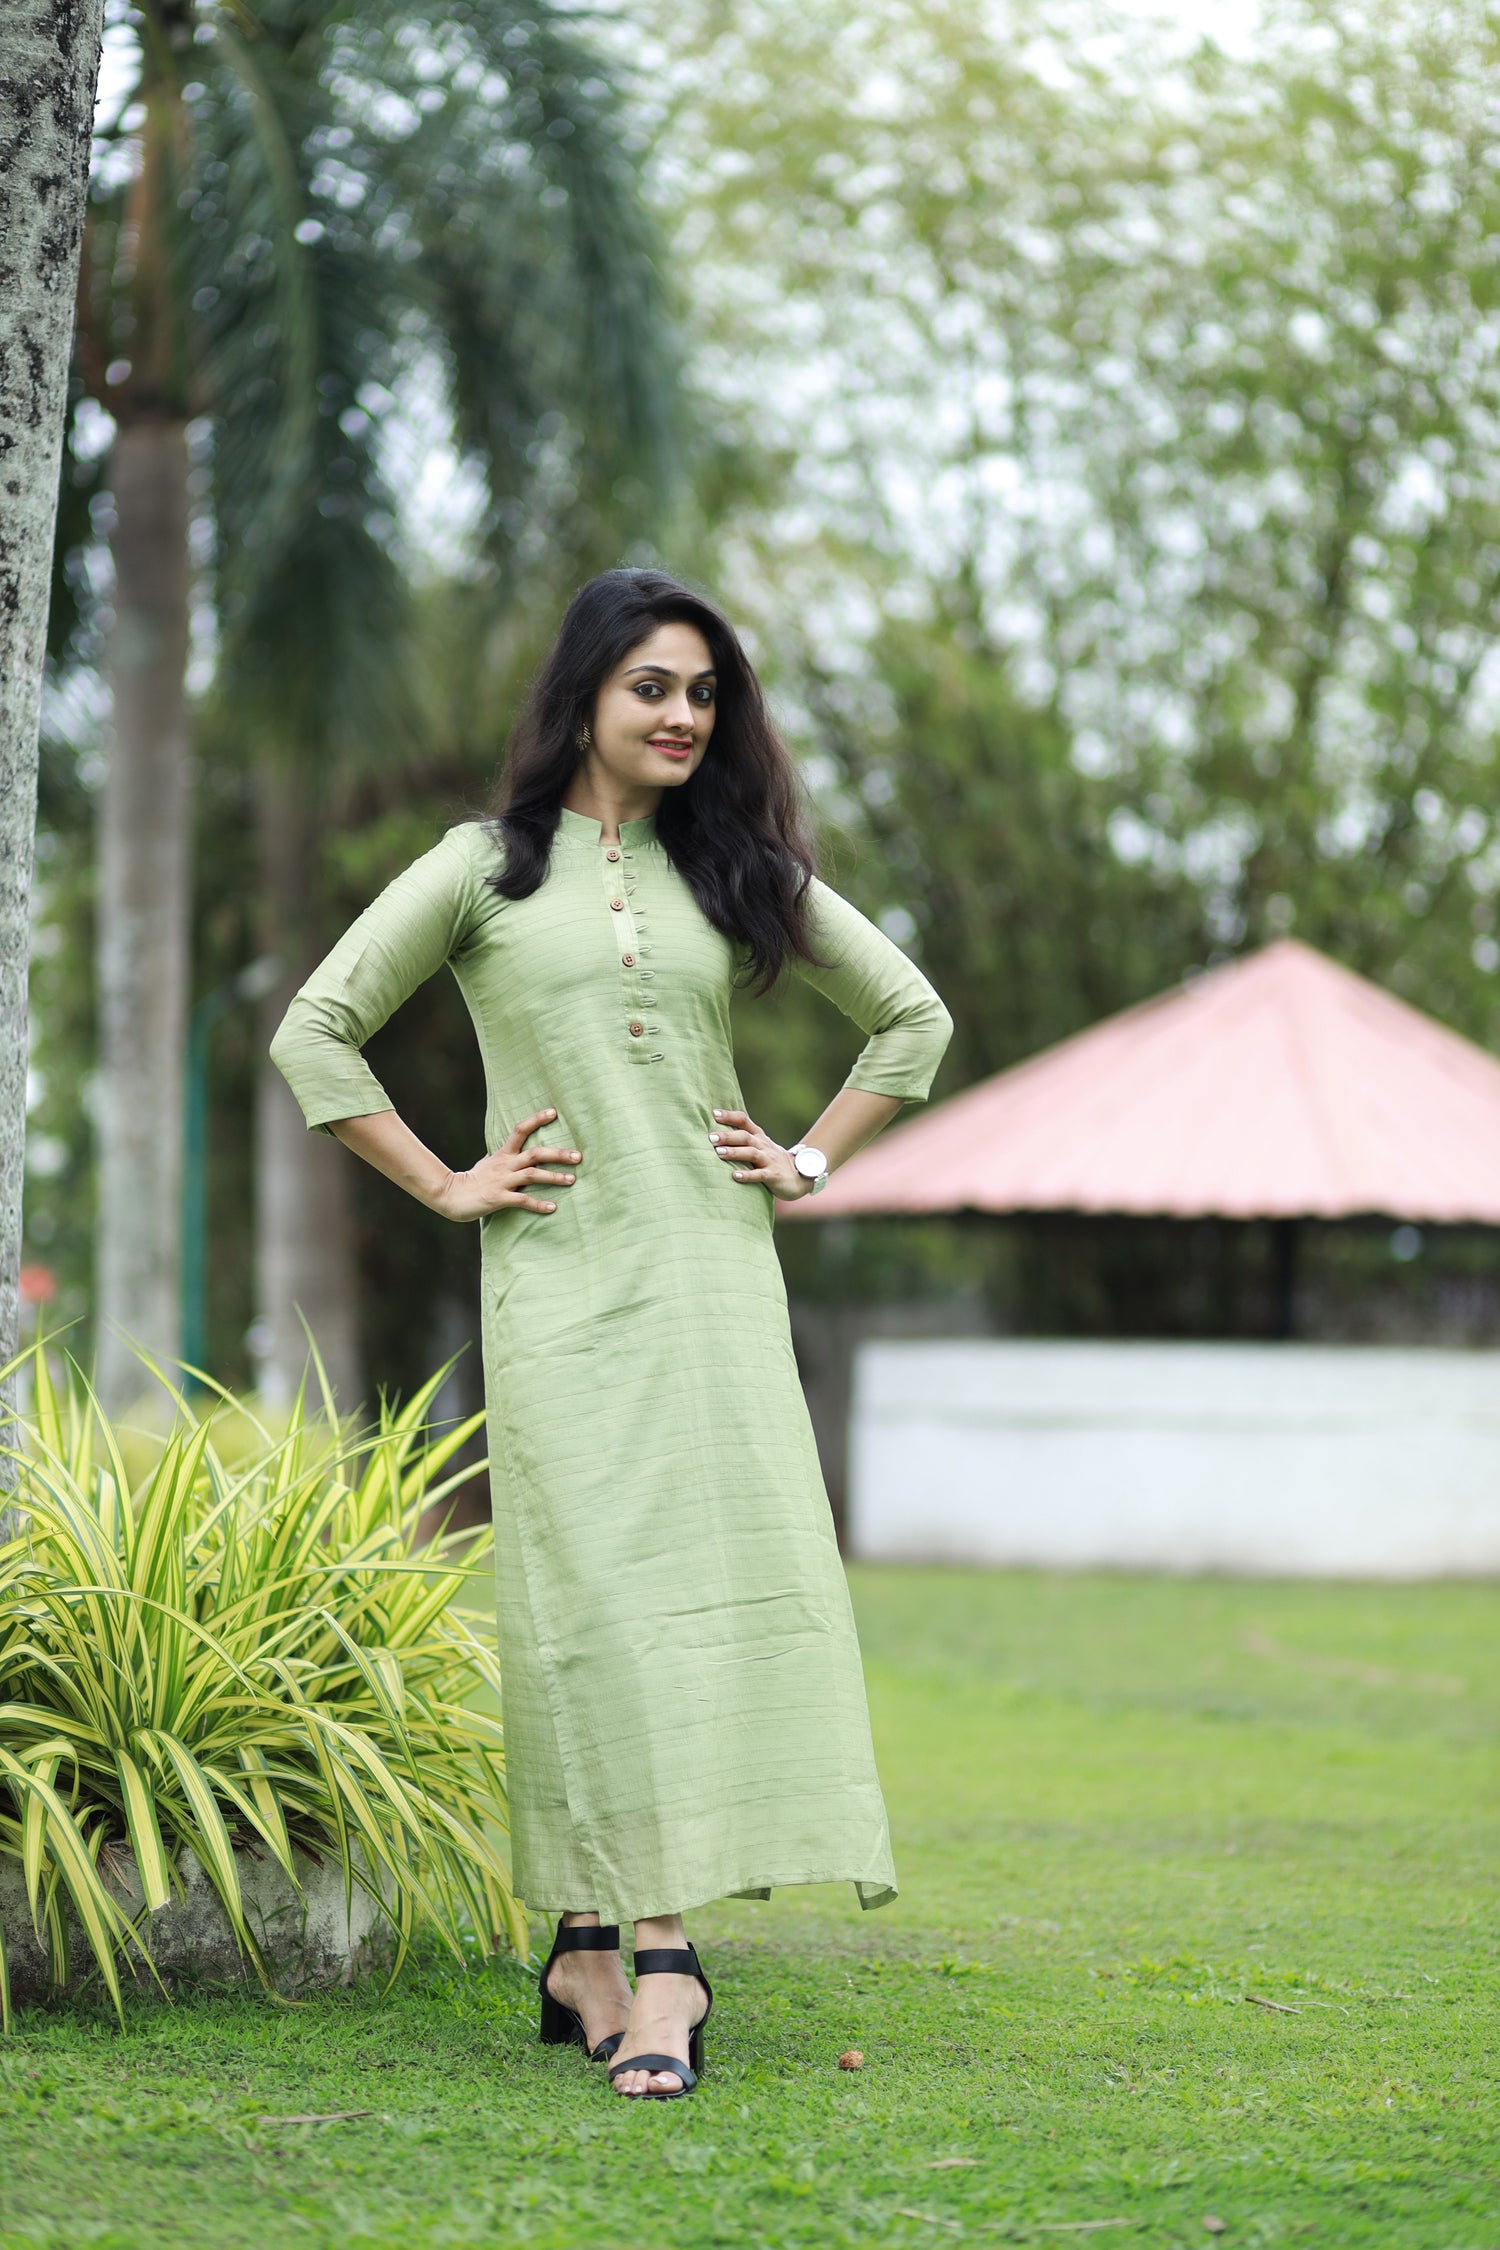 Complete your look with Elegant Silk Kurti Designs  Libas